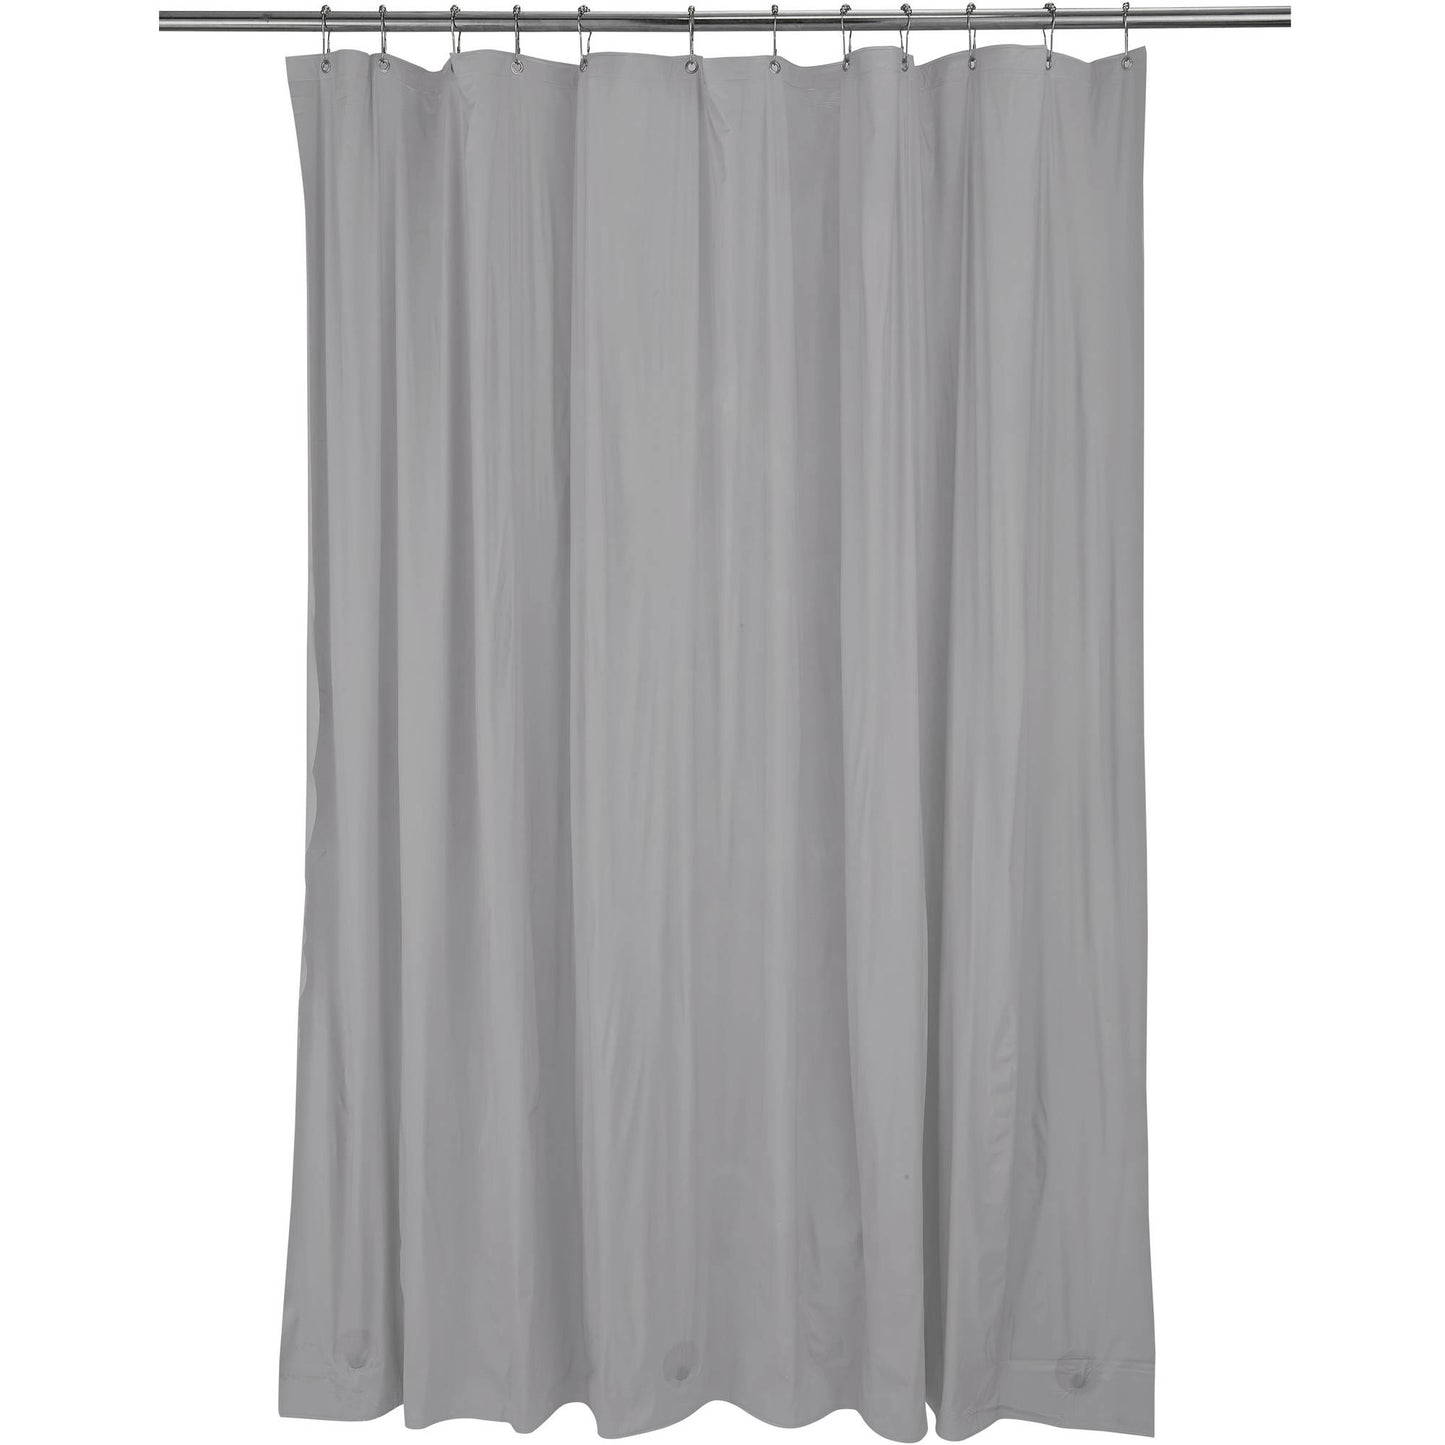 Bath Bliss Heavy Shower Curtain Liner in Silver